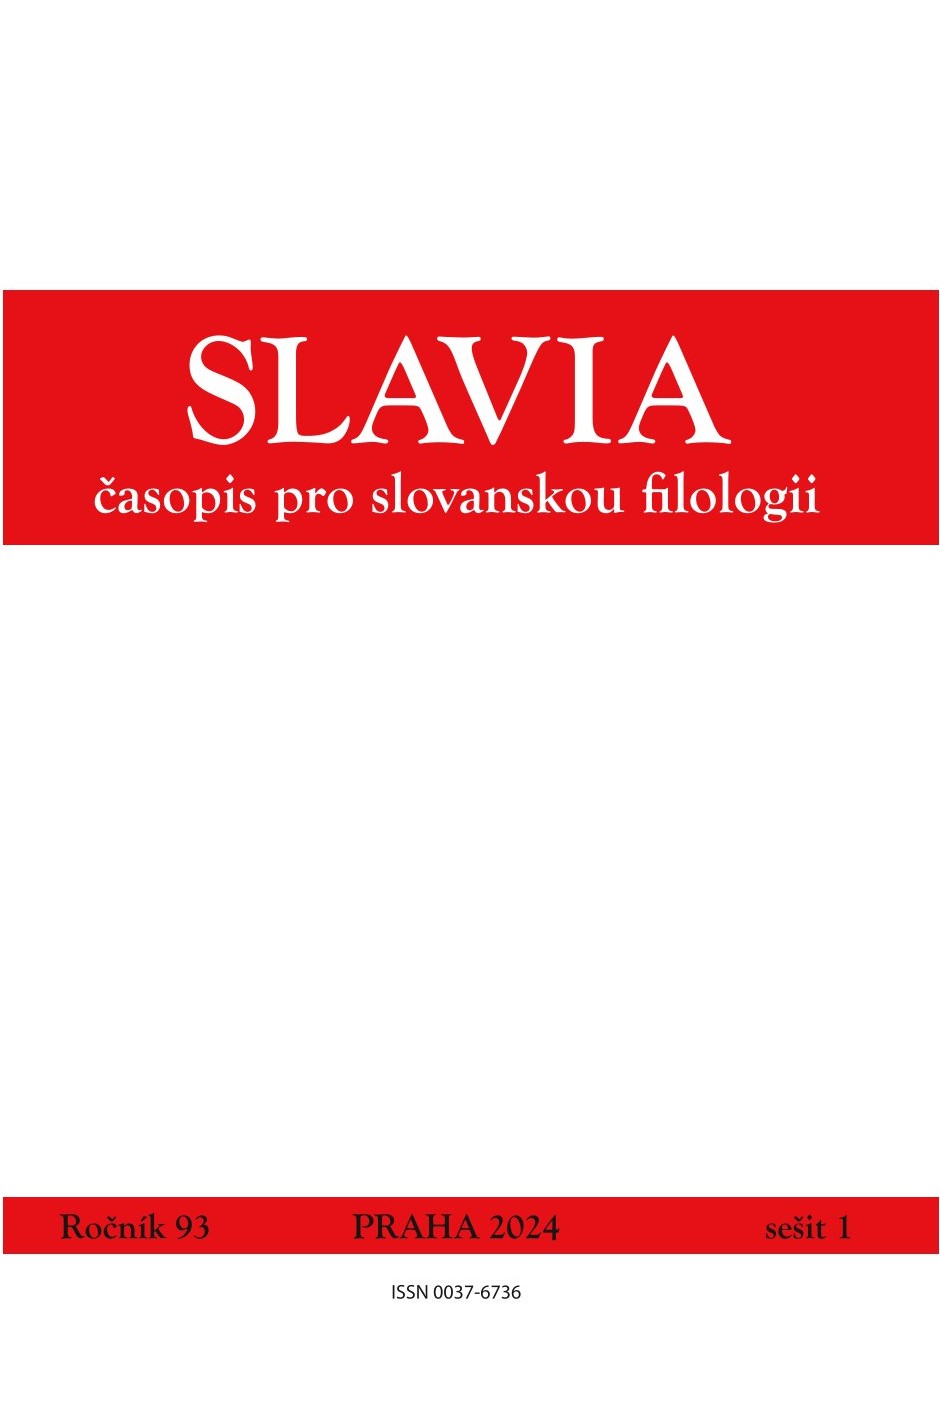 Reflections on the Recent Contributions in the Field of Slavic Mythology in Slovakia Cover Image